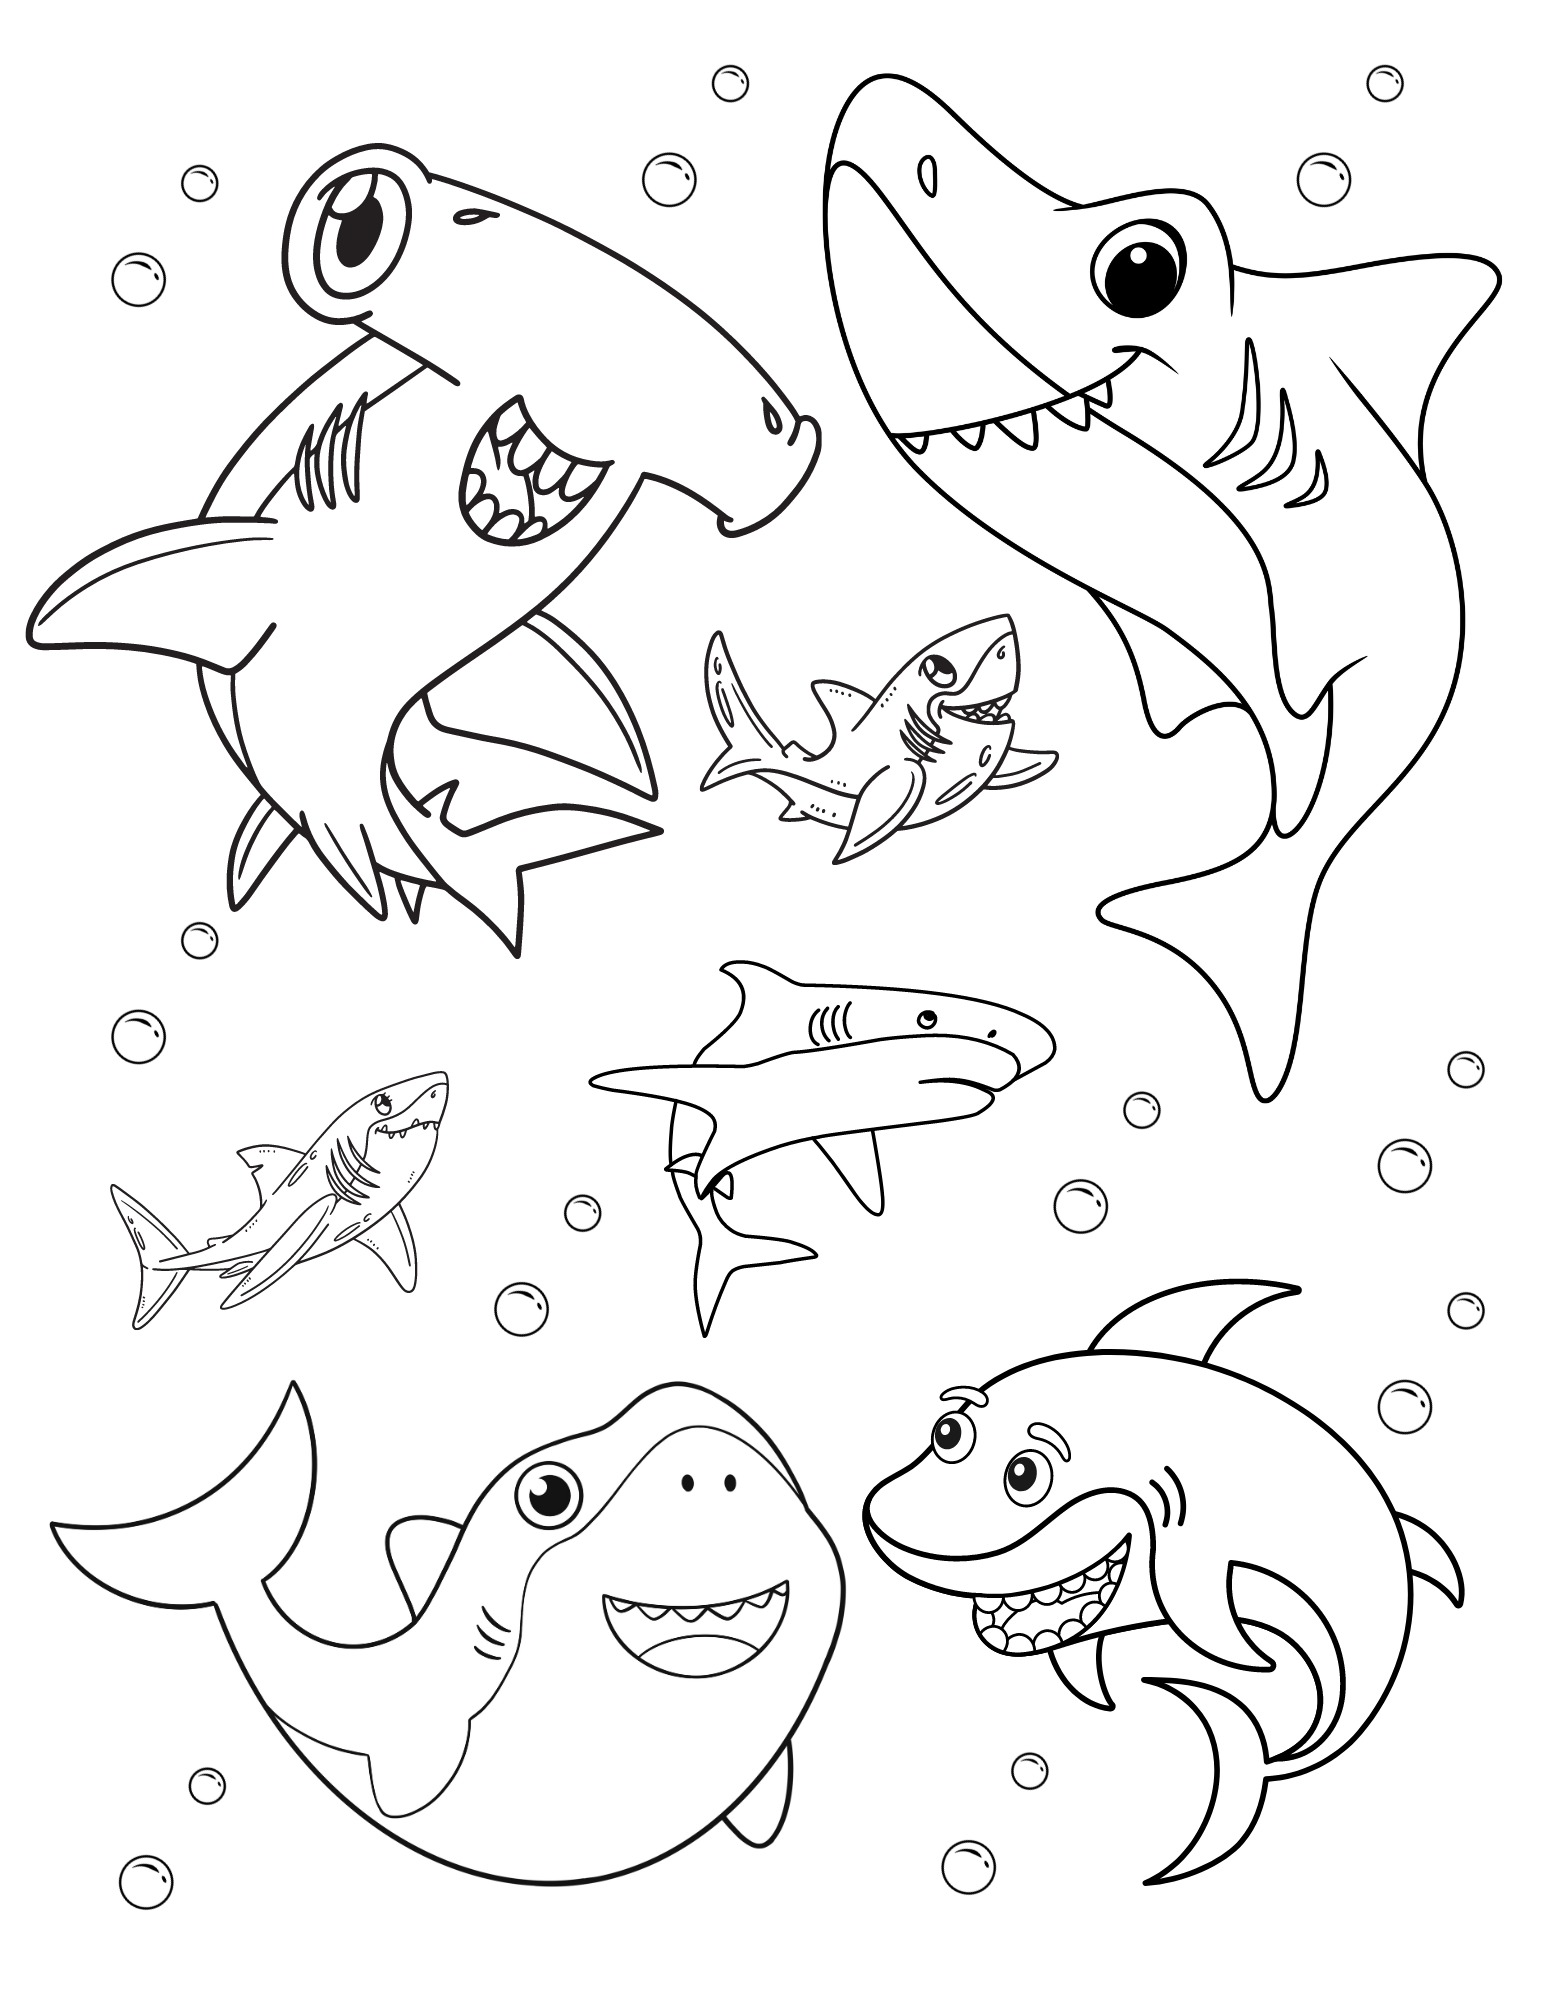 Spectacular shark coloring pages for kids and adults